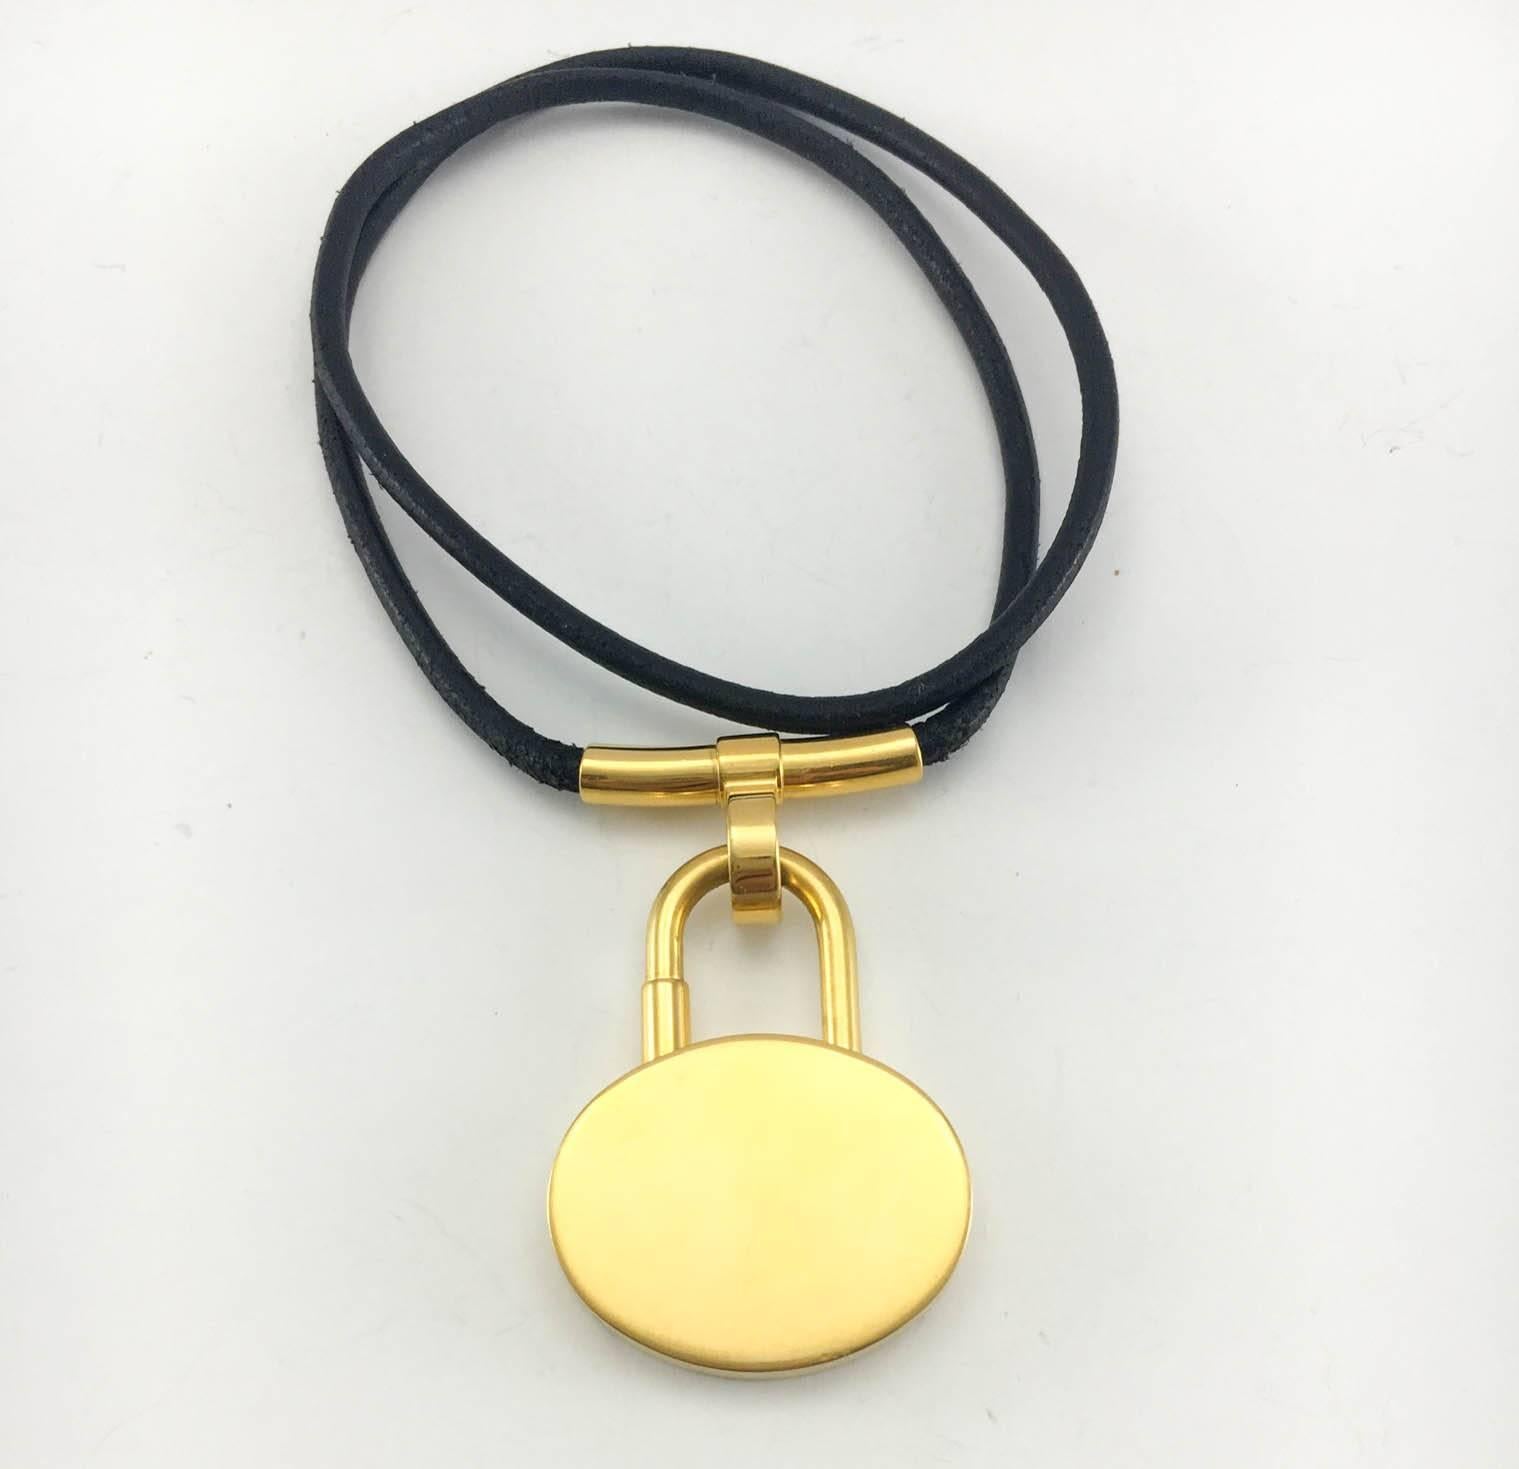 Hermes Gold-Plated Lock Pendant Necklace - 2003 1